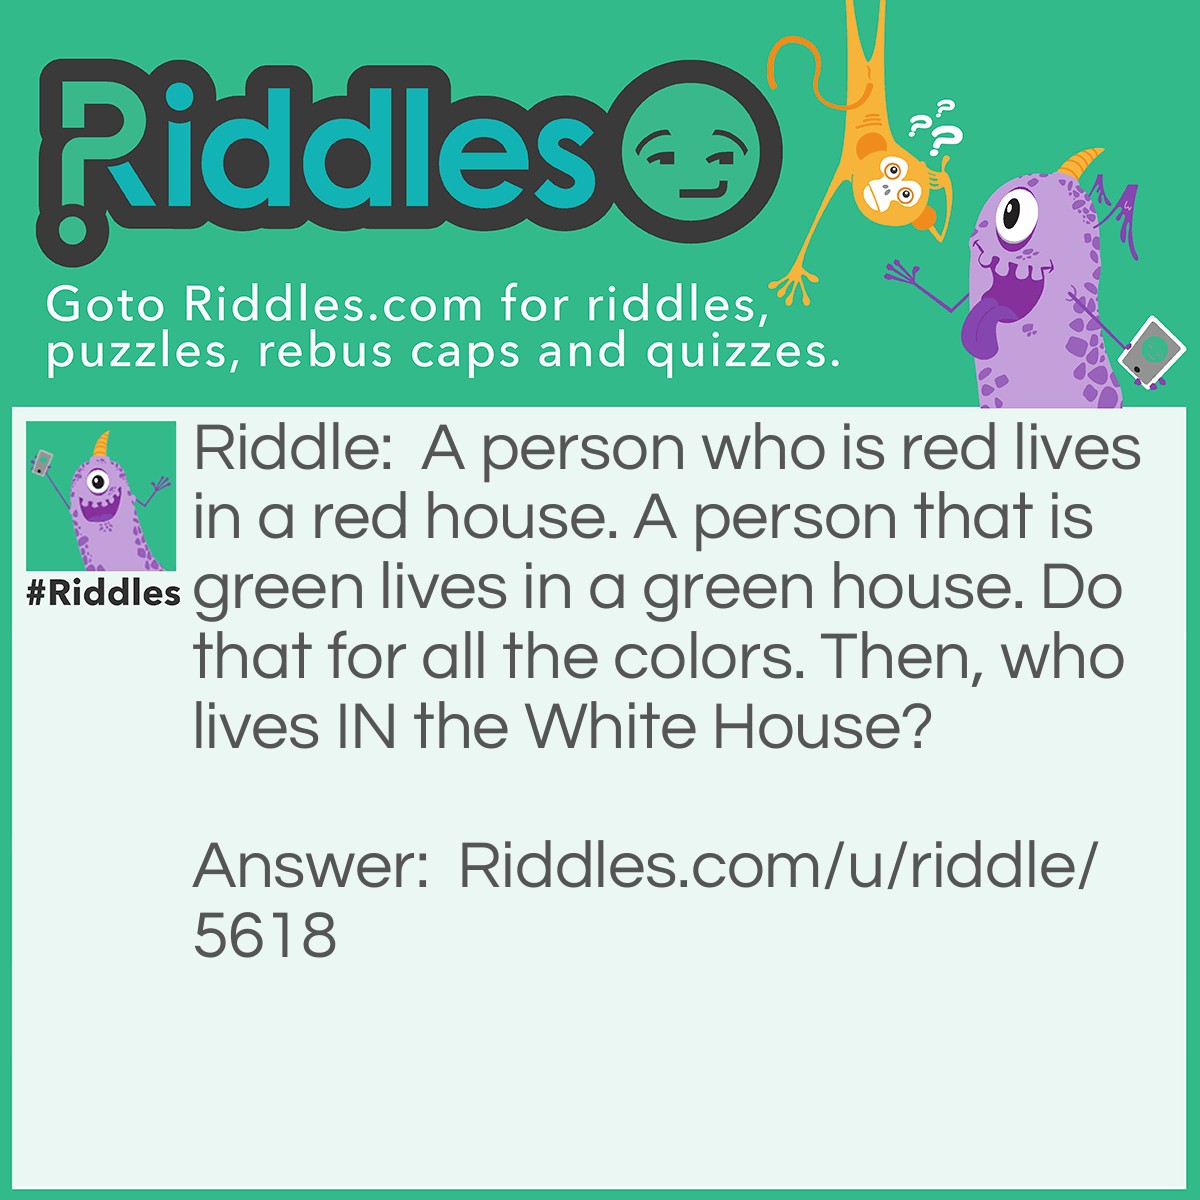 Riddle: A person who is red lives in a red house. A person that is green lives in a green house. Do that for all the colors. Then, who lives IN the White House? Answer: THE PRESIDENT!